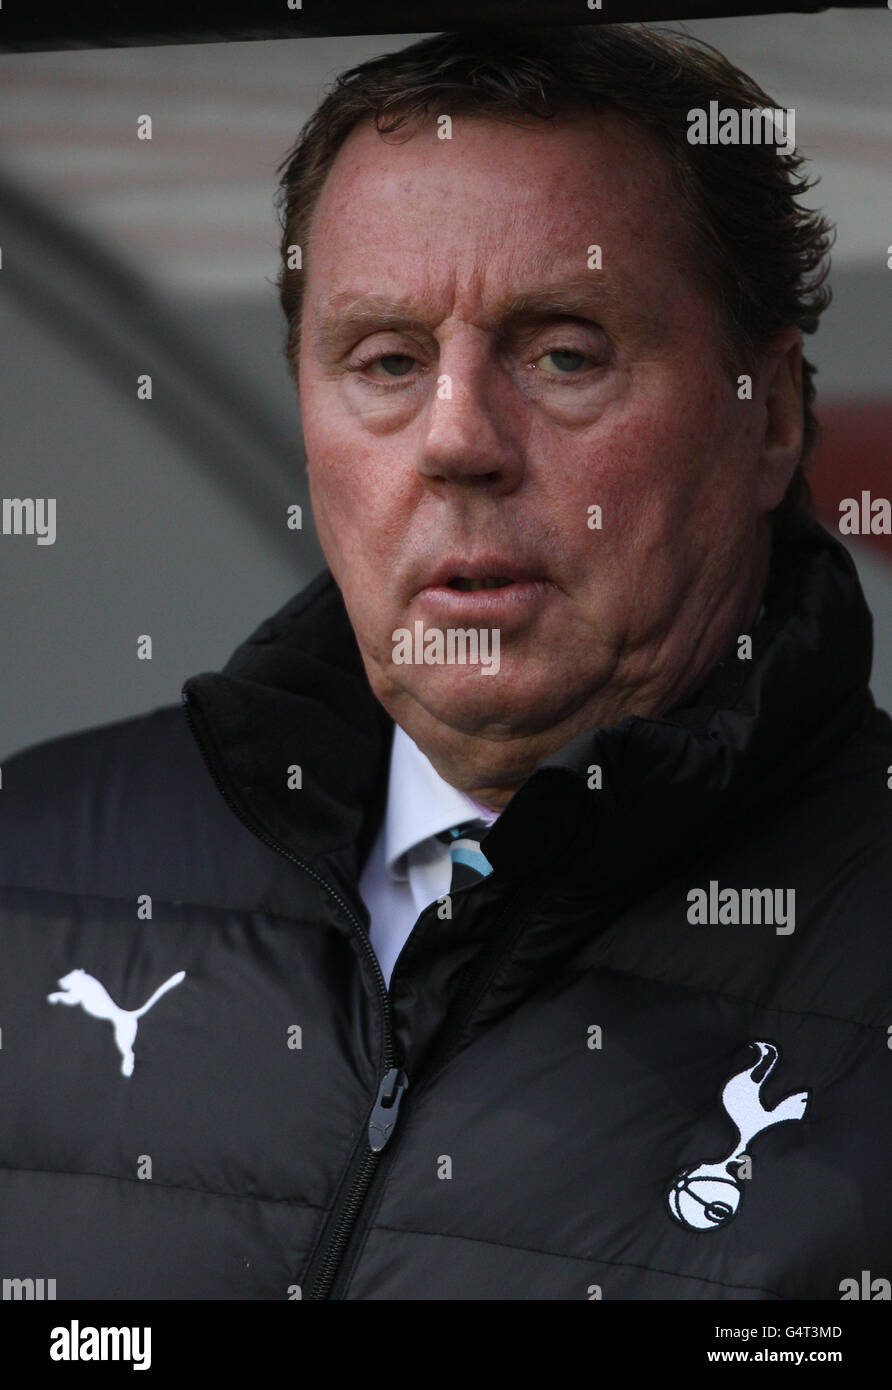 Tottenham Hotspur's Manager Harry Redknapp before the Barclays Premier League match at the Liberty Stadium, Swansea. Stock Photo